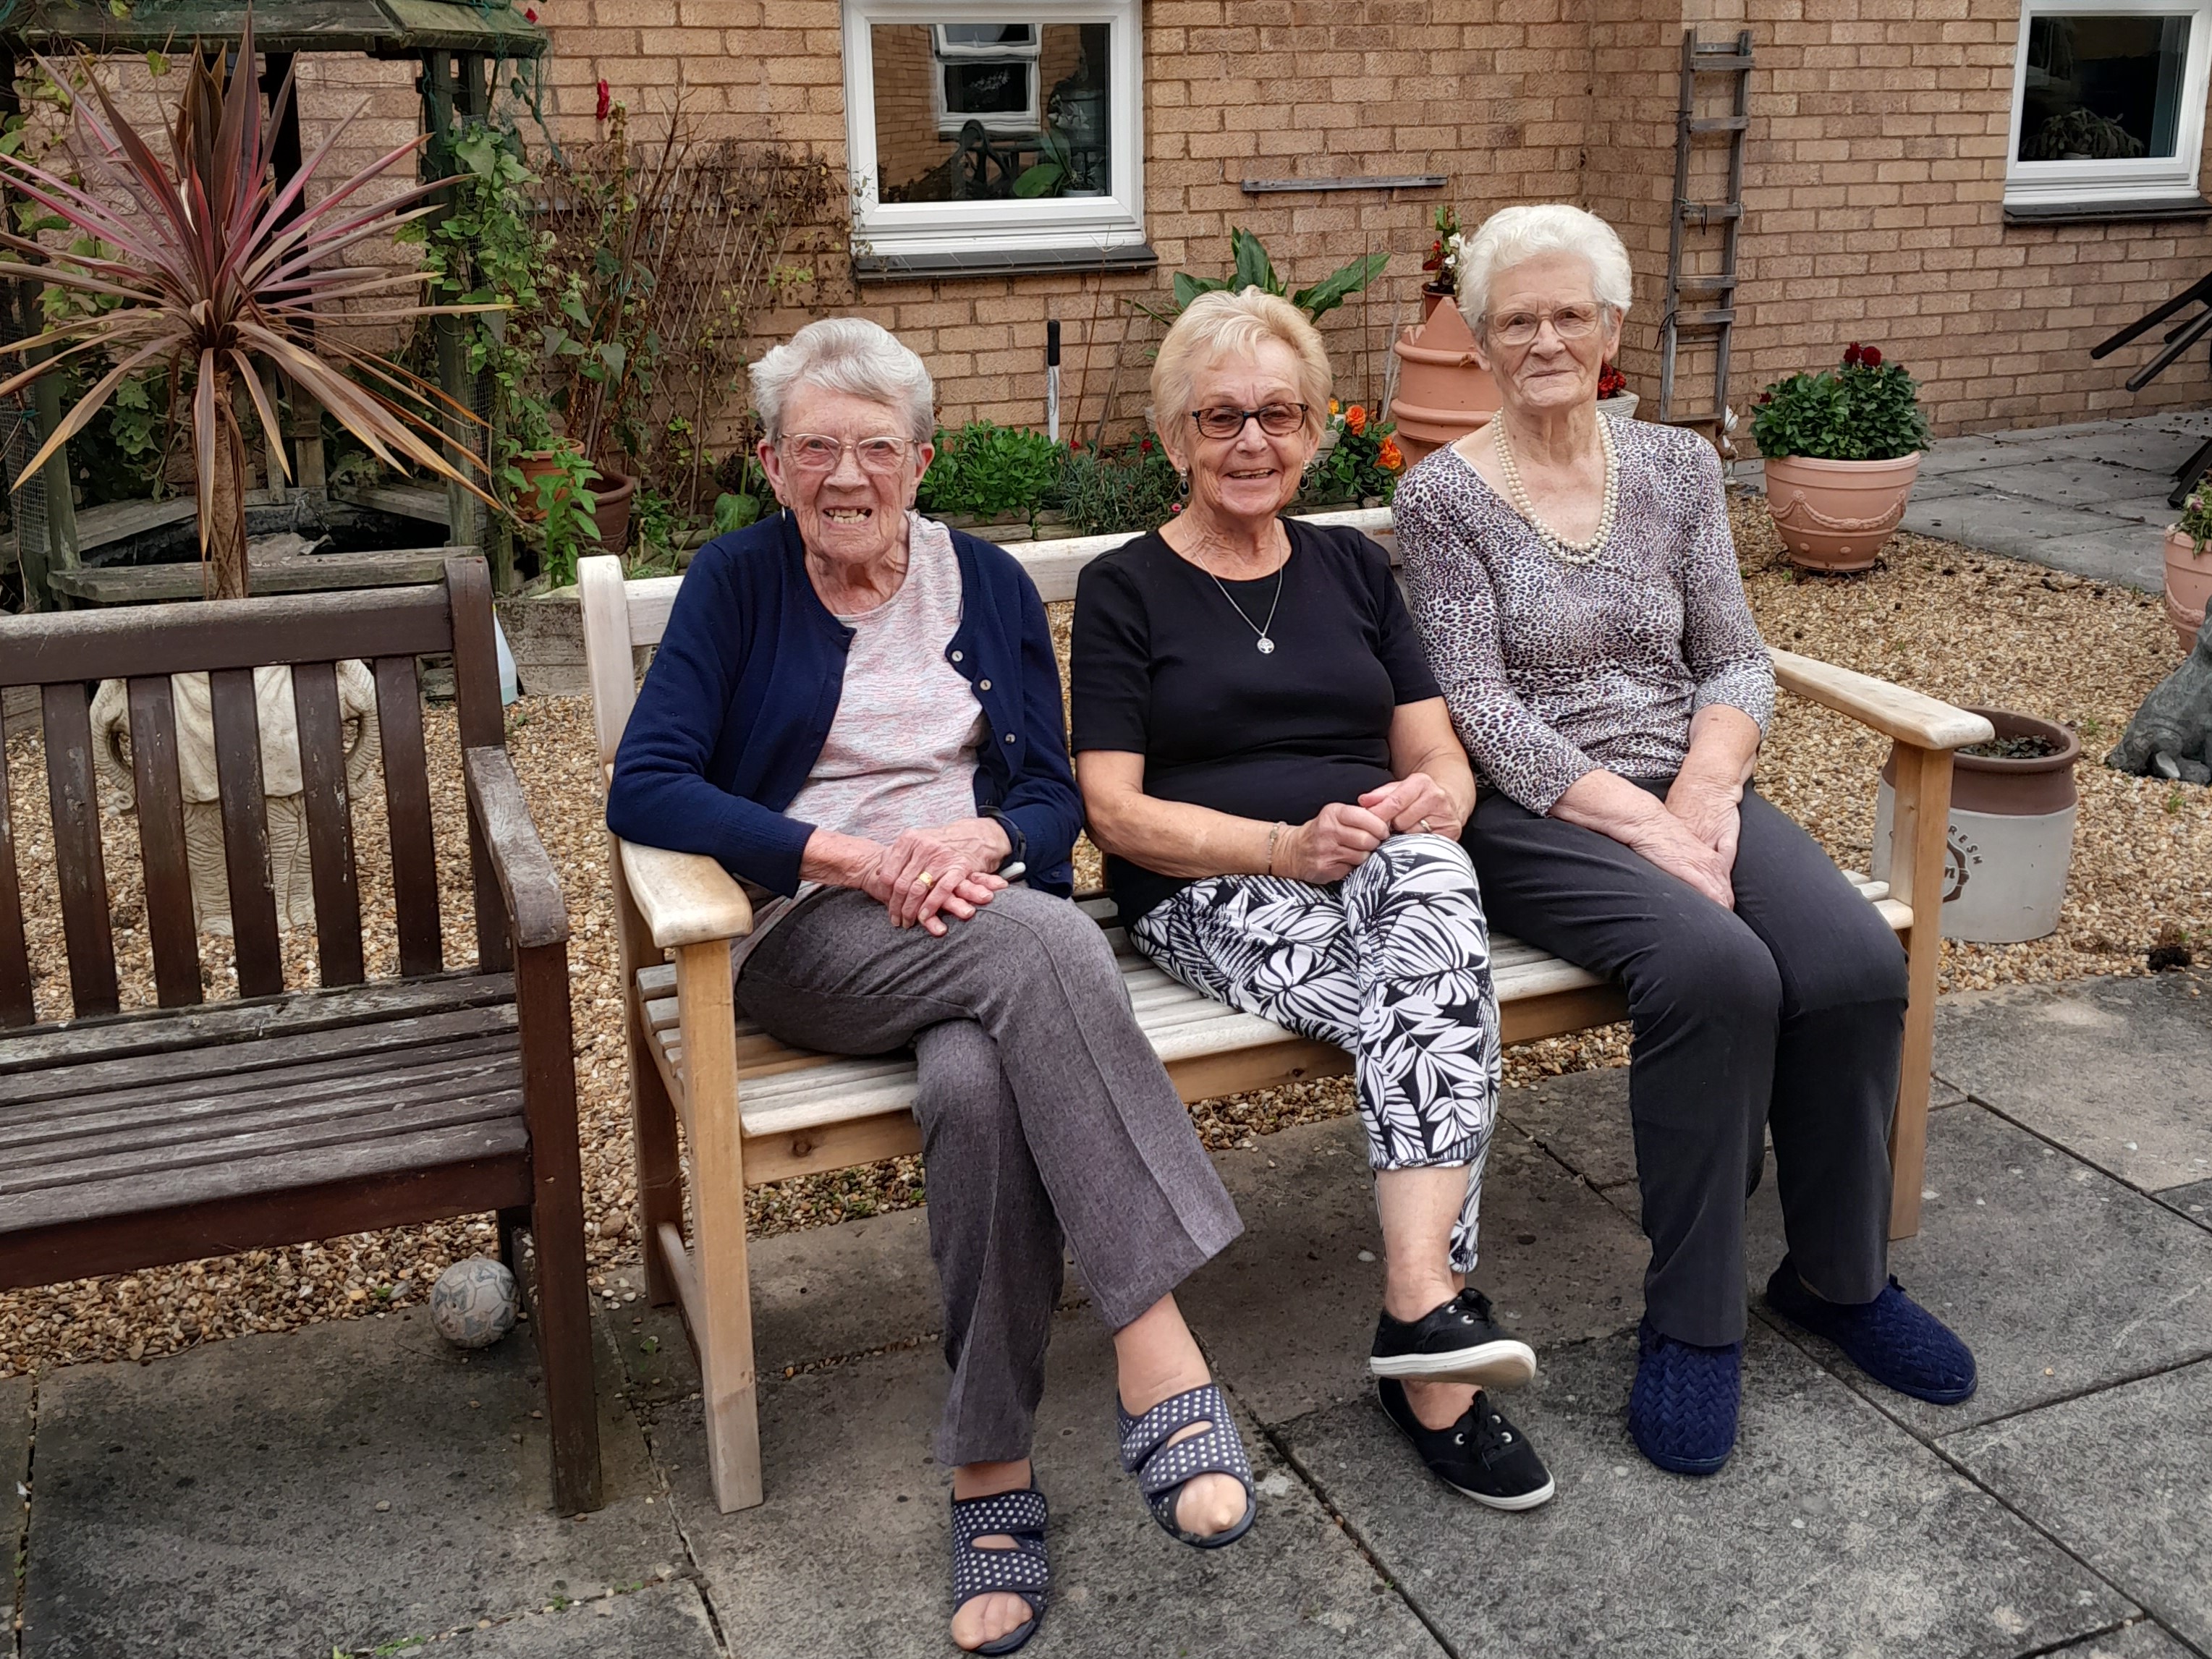 Three ladies sitting on a bench smiling